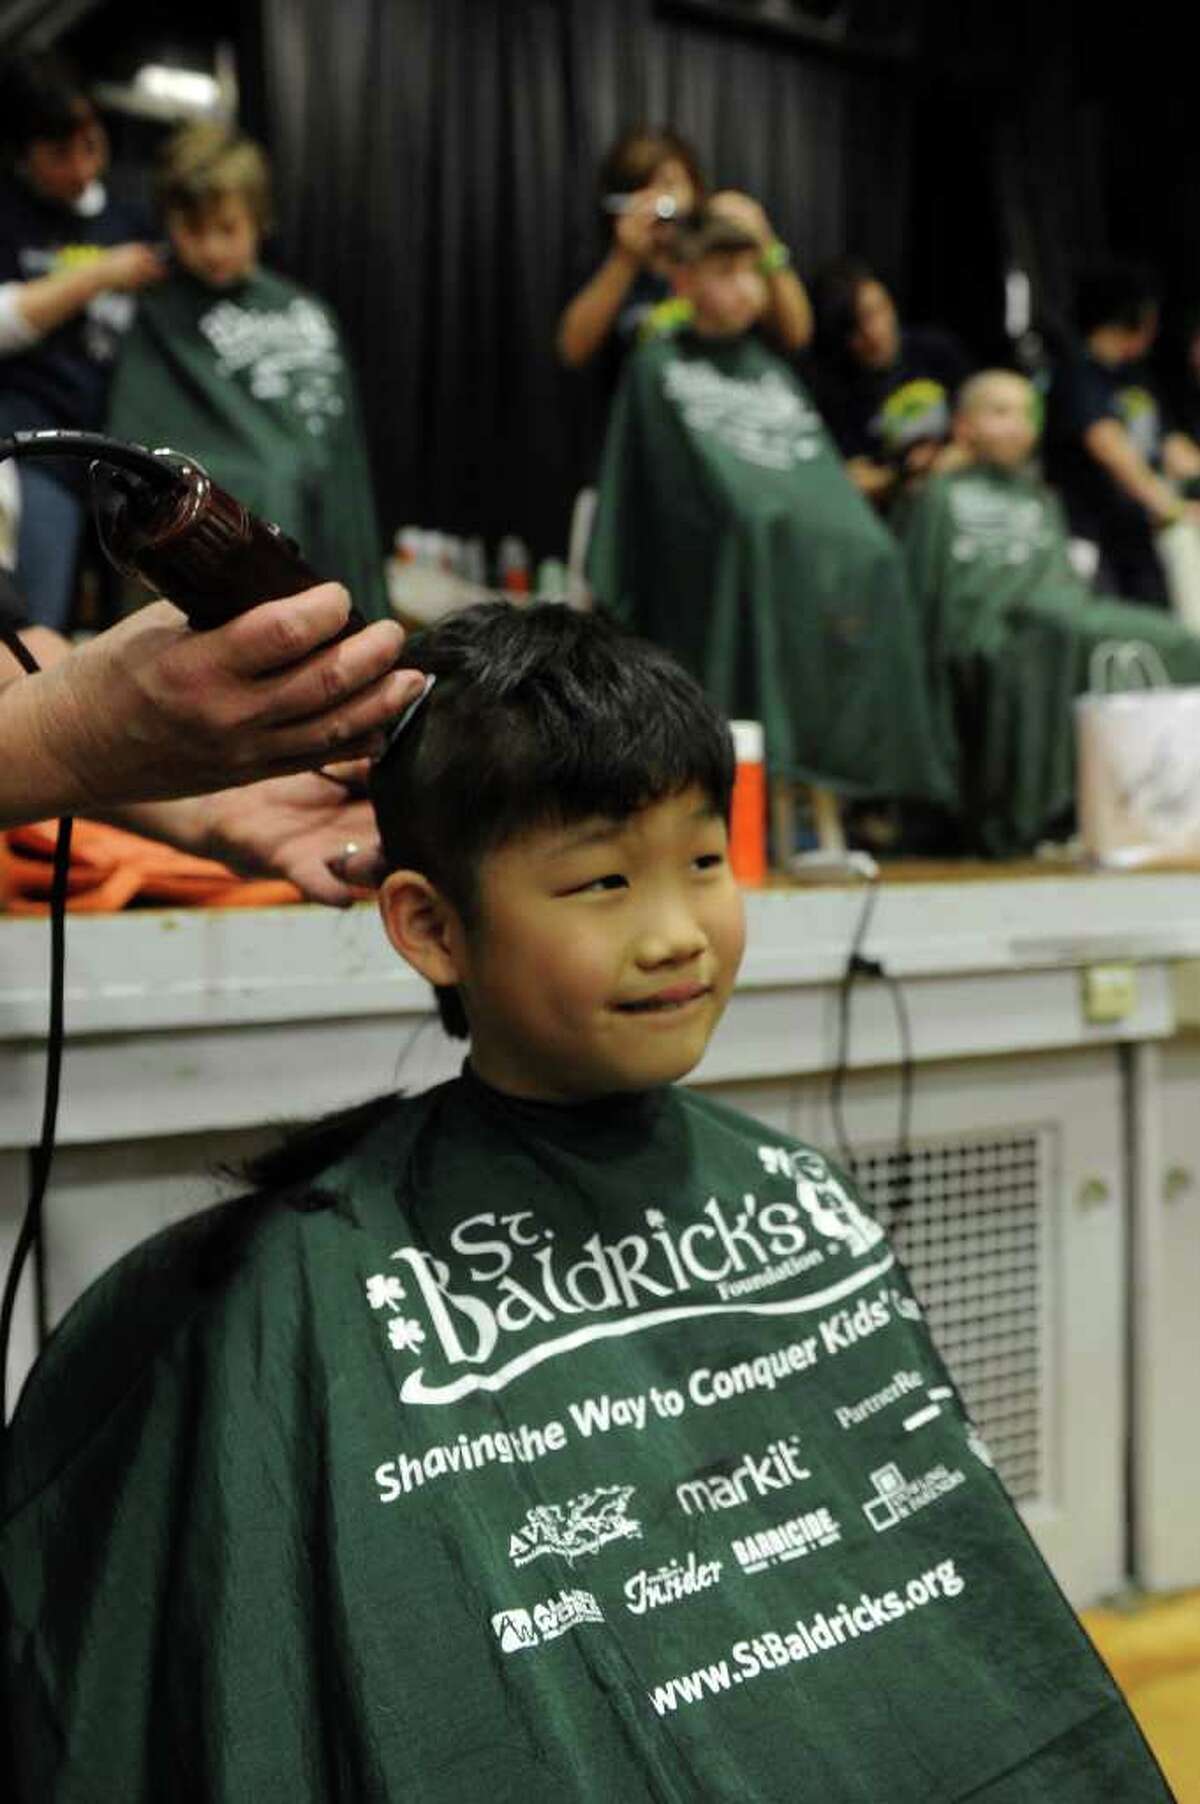 Jae Leighton, 9, gets his hair saved during Friday's St. Baldrick's fundraiser for children with cancer on March 11, 2011.